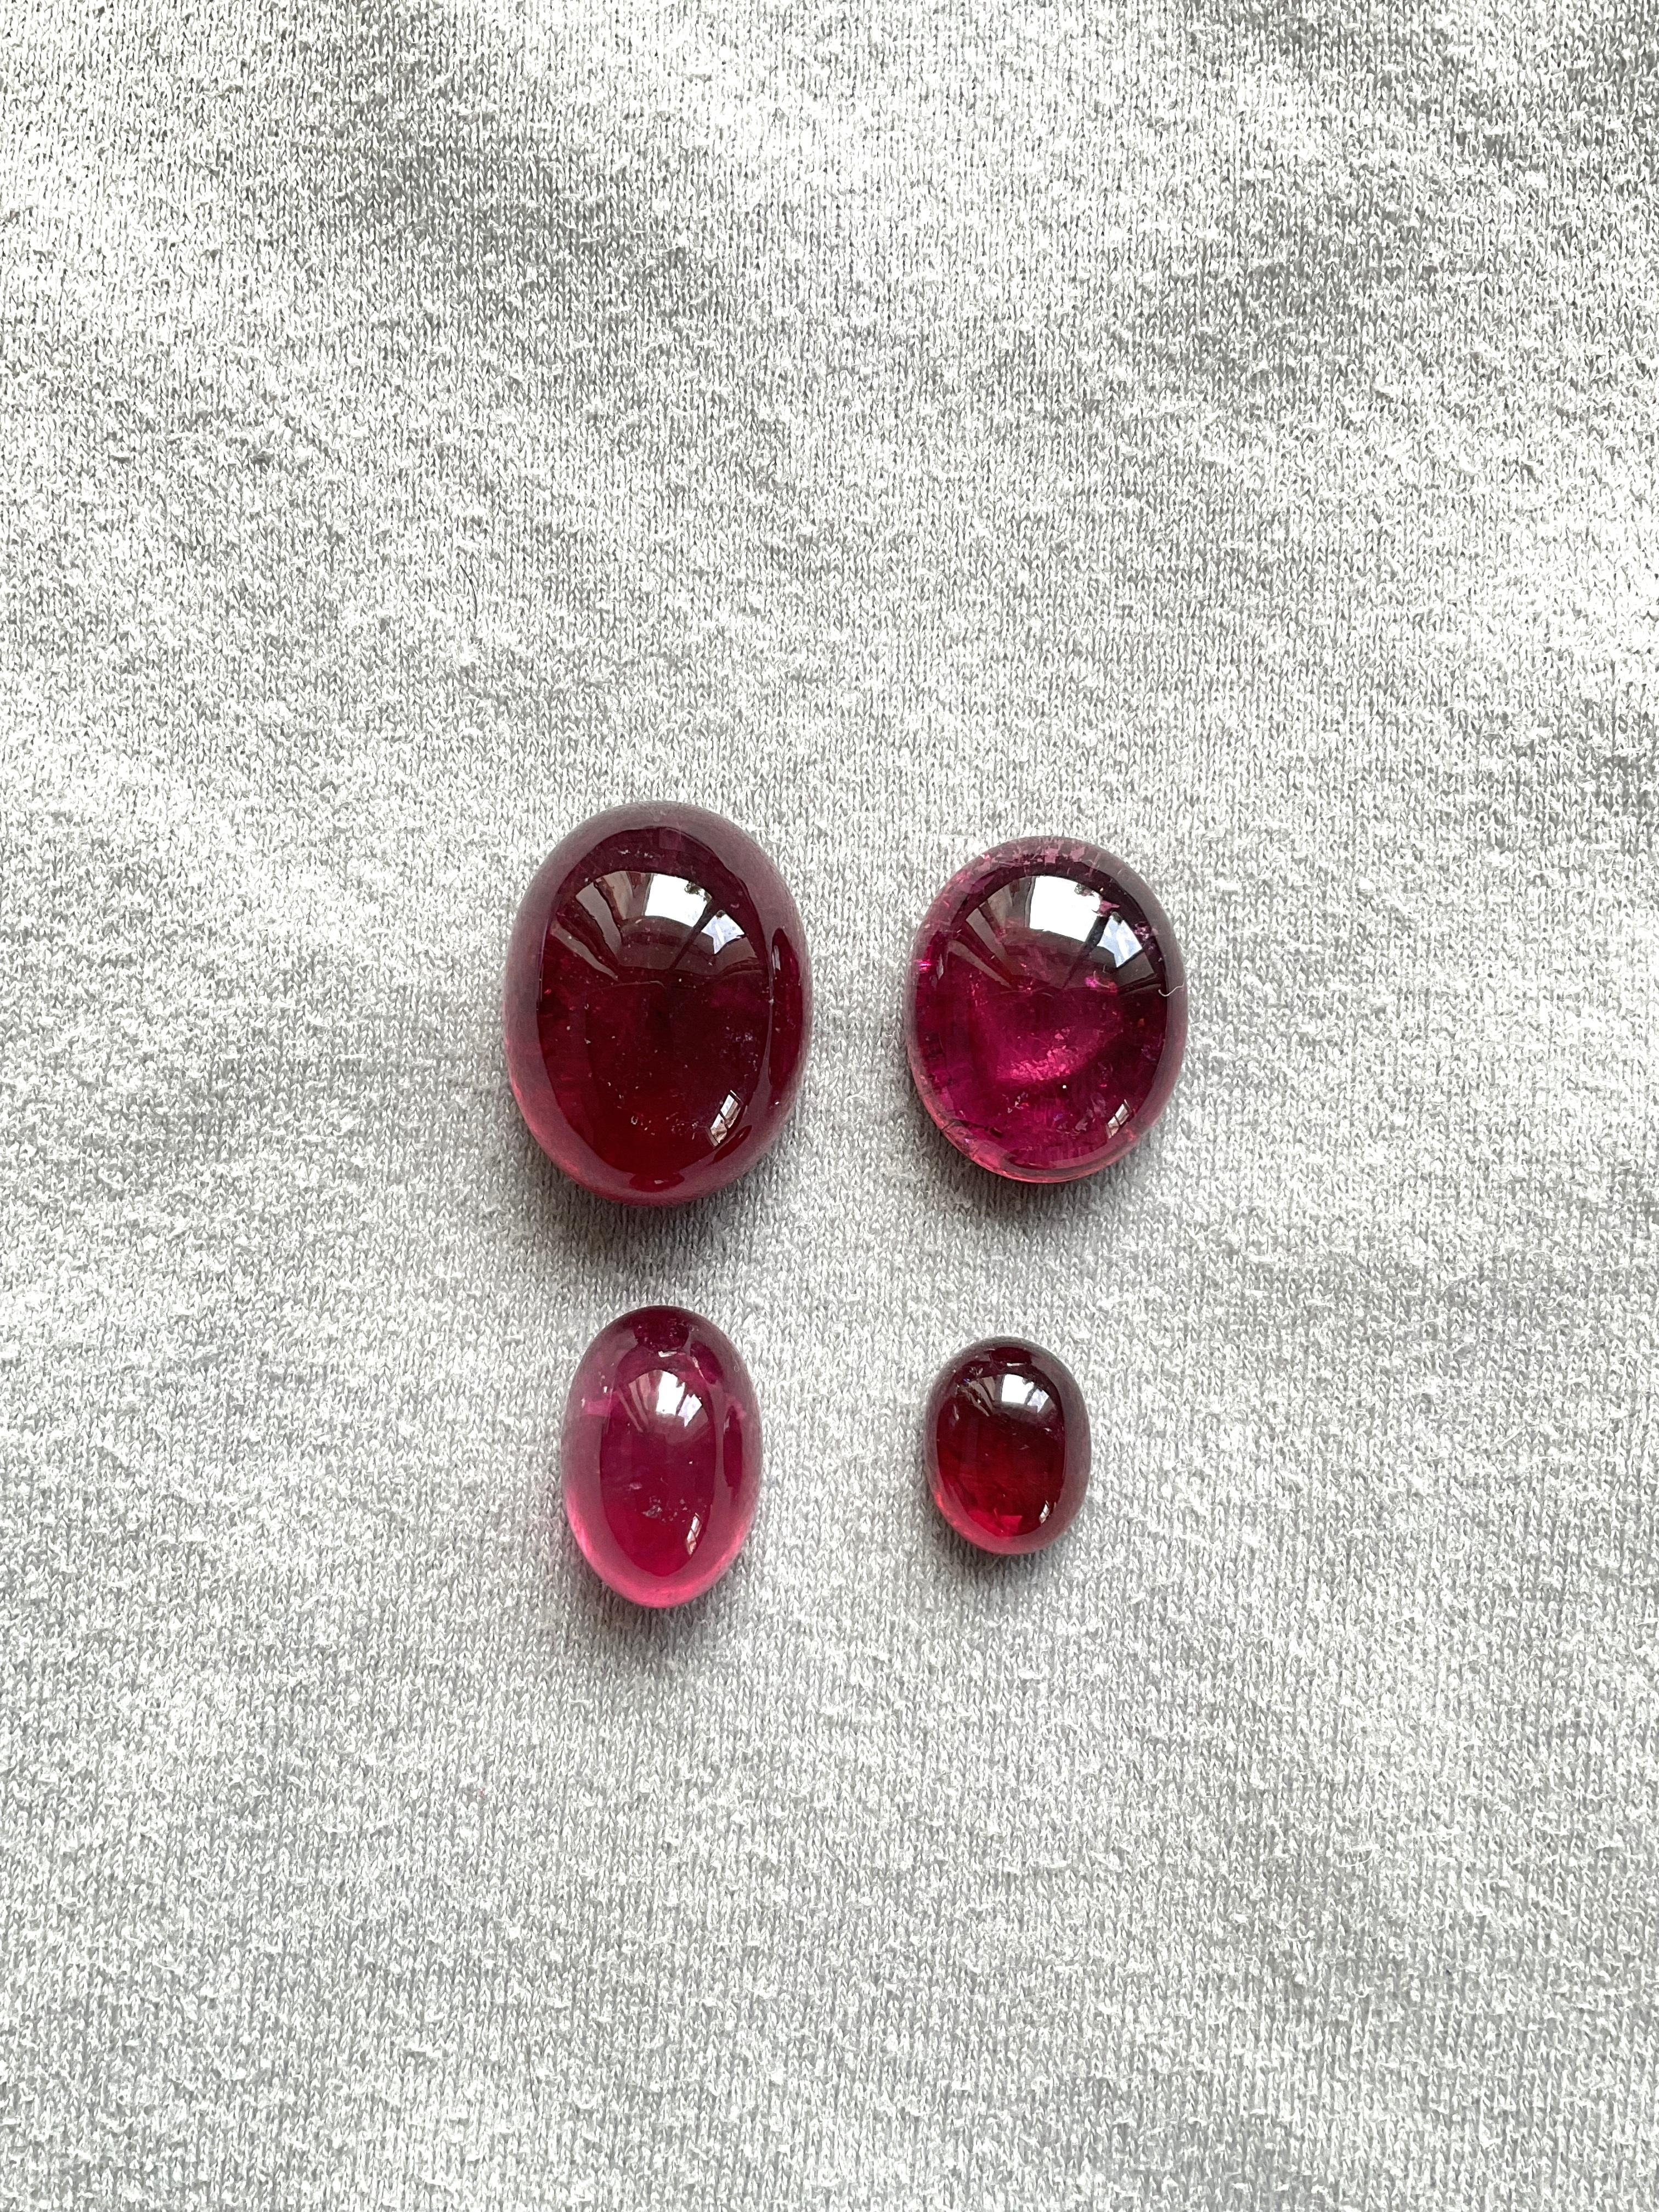 92.86 Carats Top Quality Rubellite Tourmaline Cabochon 4 Pieces Natural Gemstone In New Condition For Sale In Jaipur, RJ